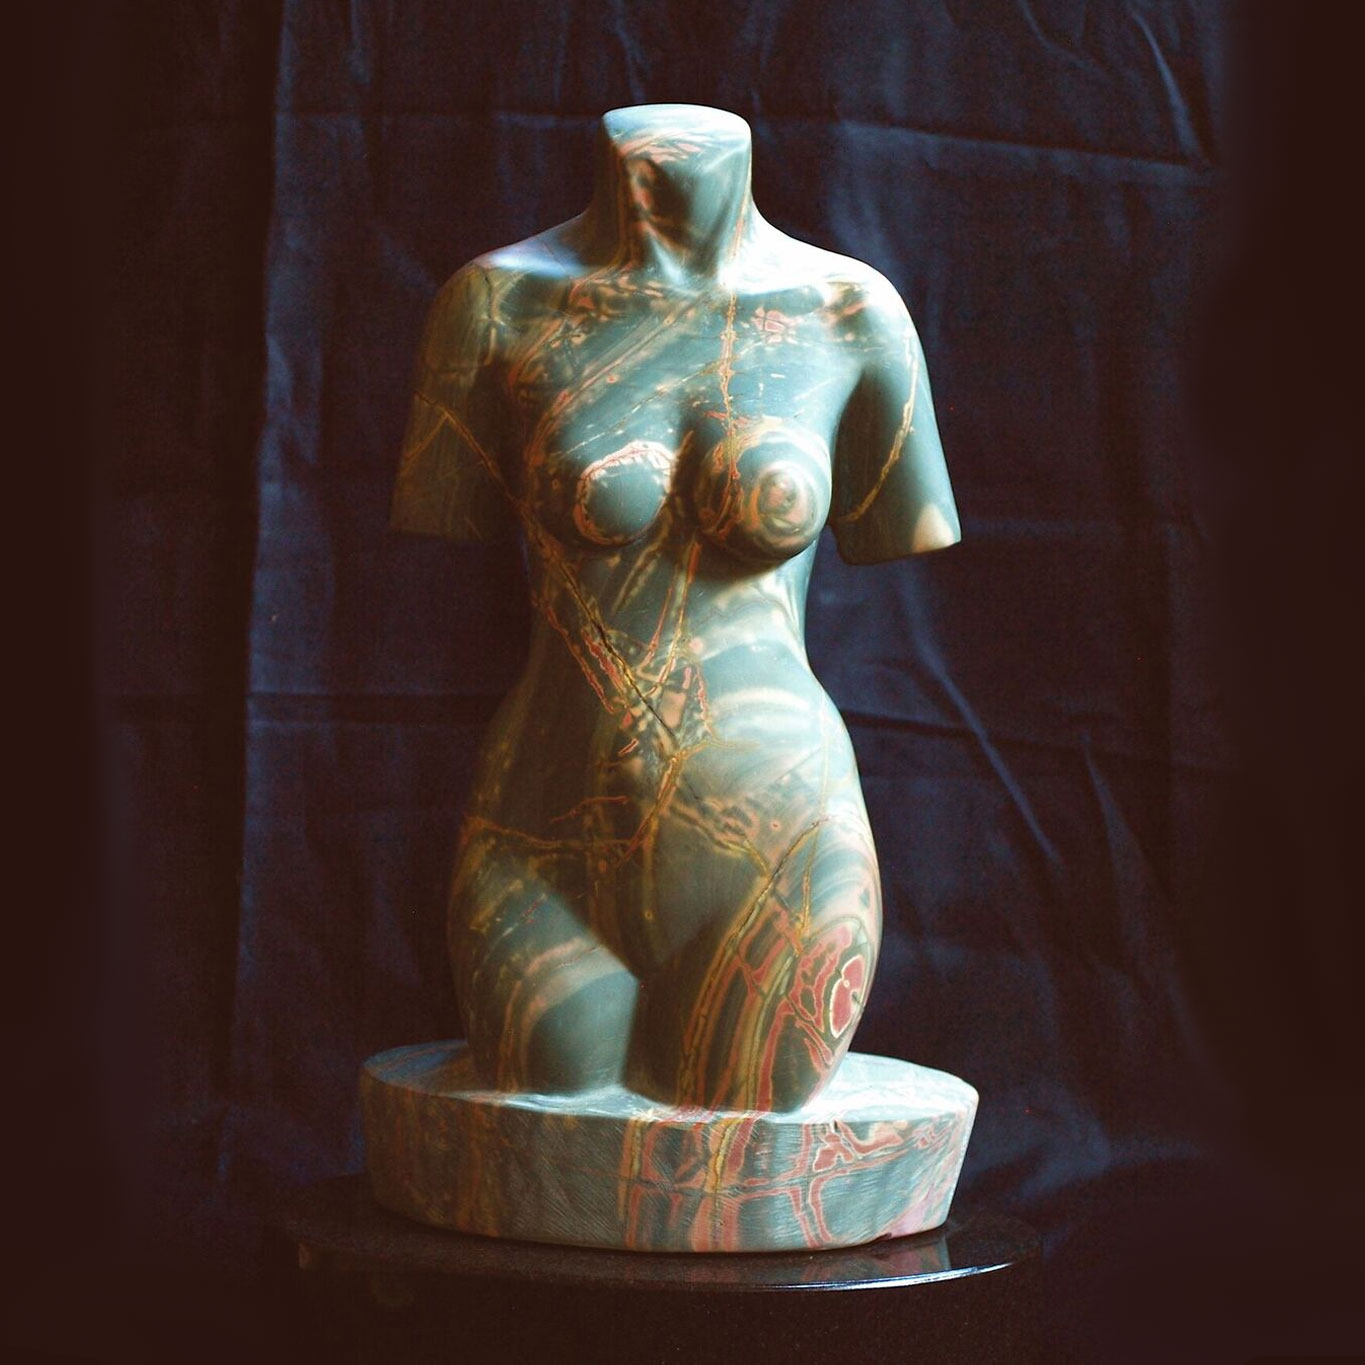 Mike Leckie Sculptor She's a Complicated Girl